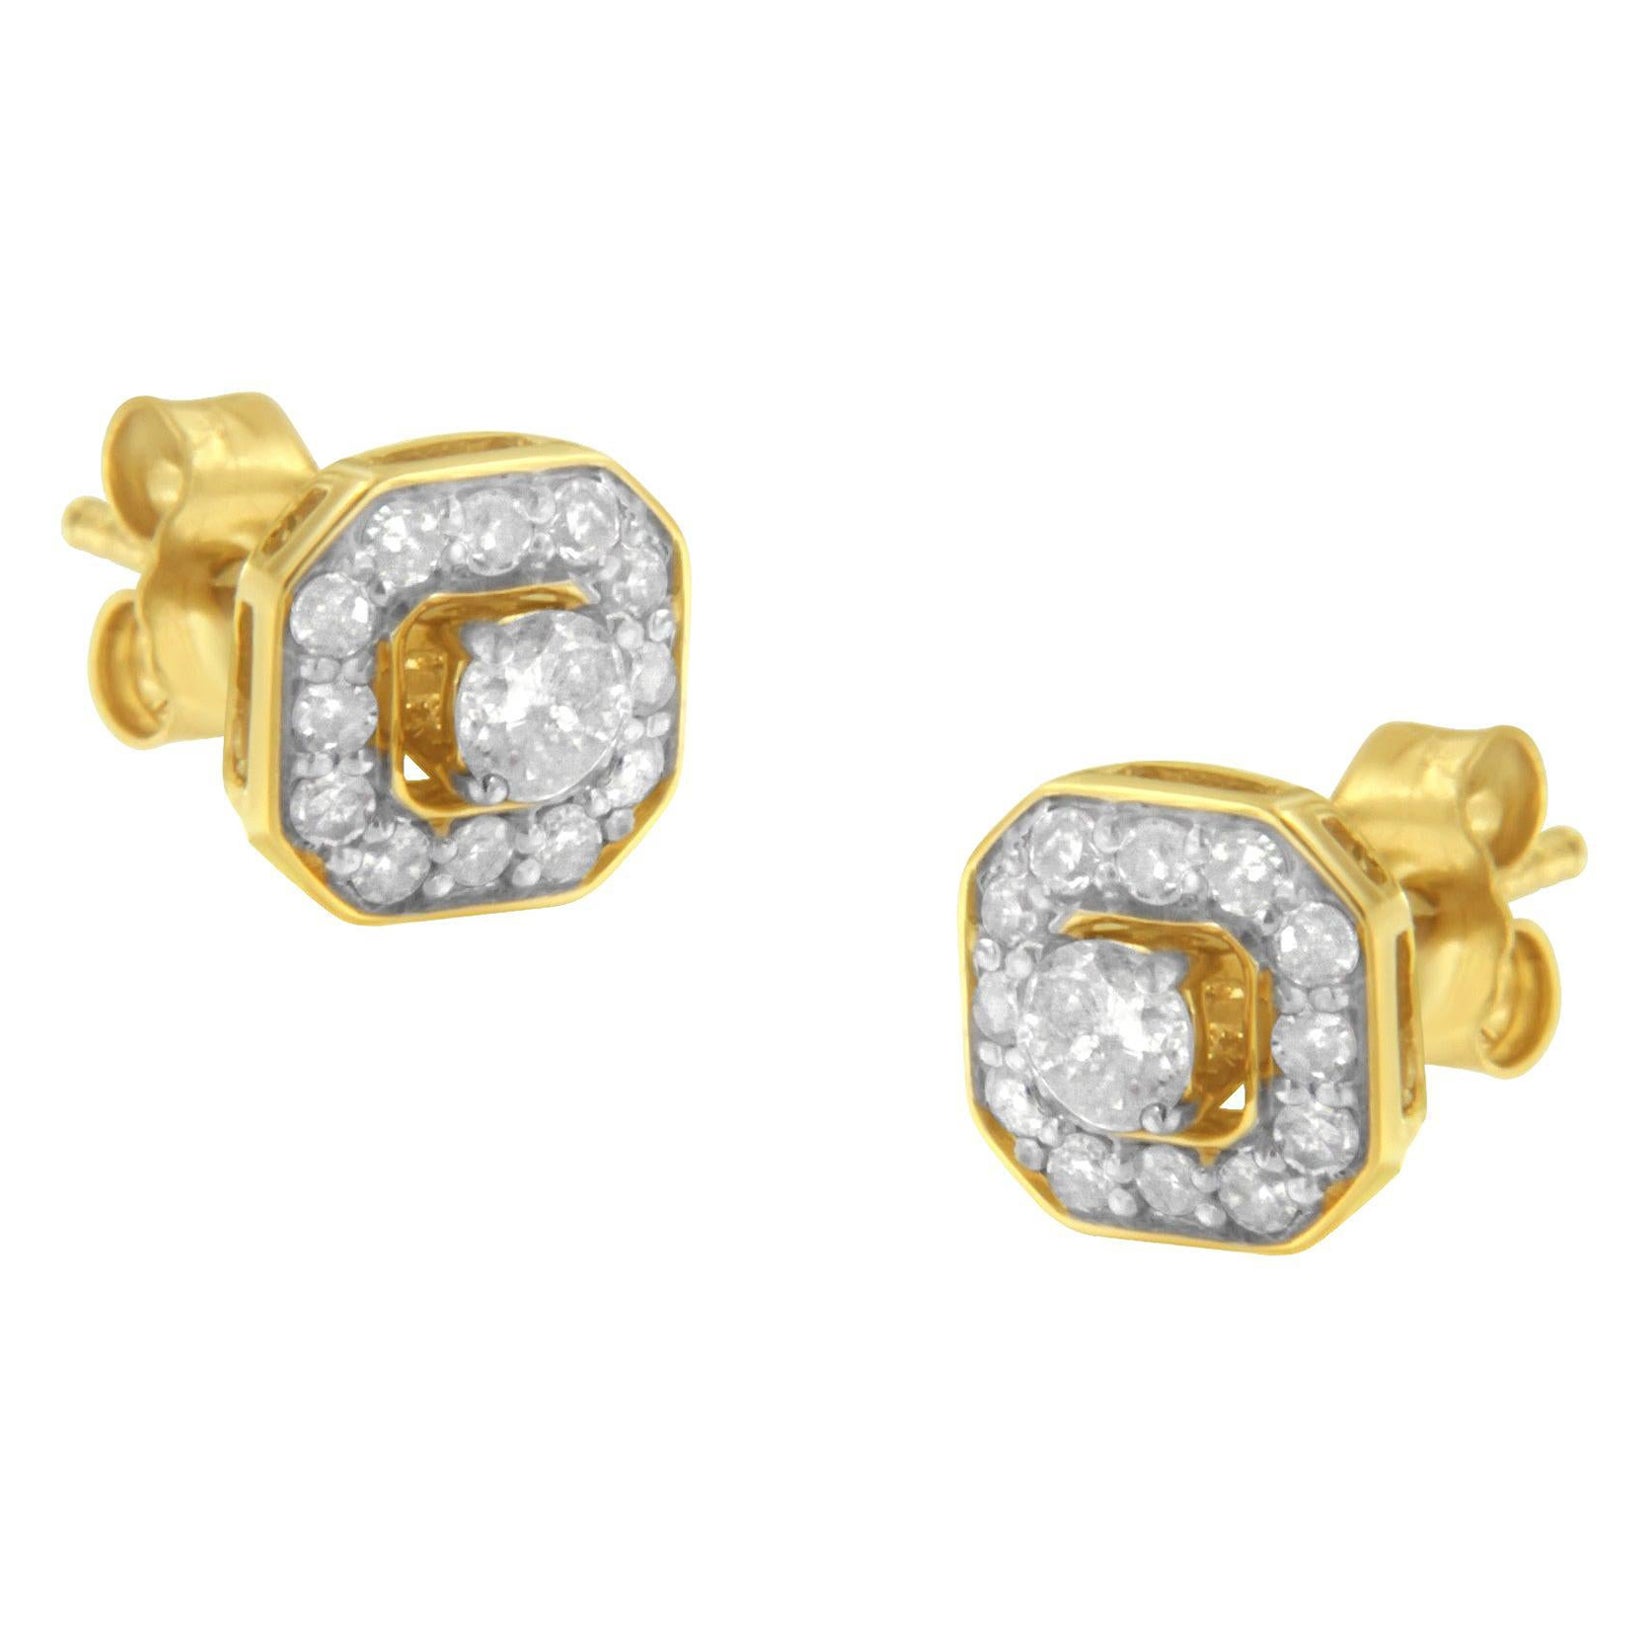 Yellow Gold Plated .925 Sterling Silver 1/2 Carat Diamond Square Stud Earrings